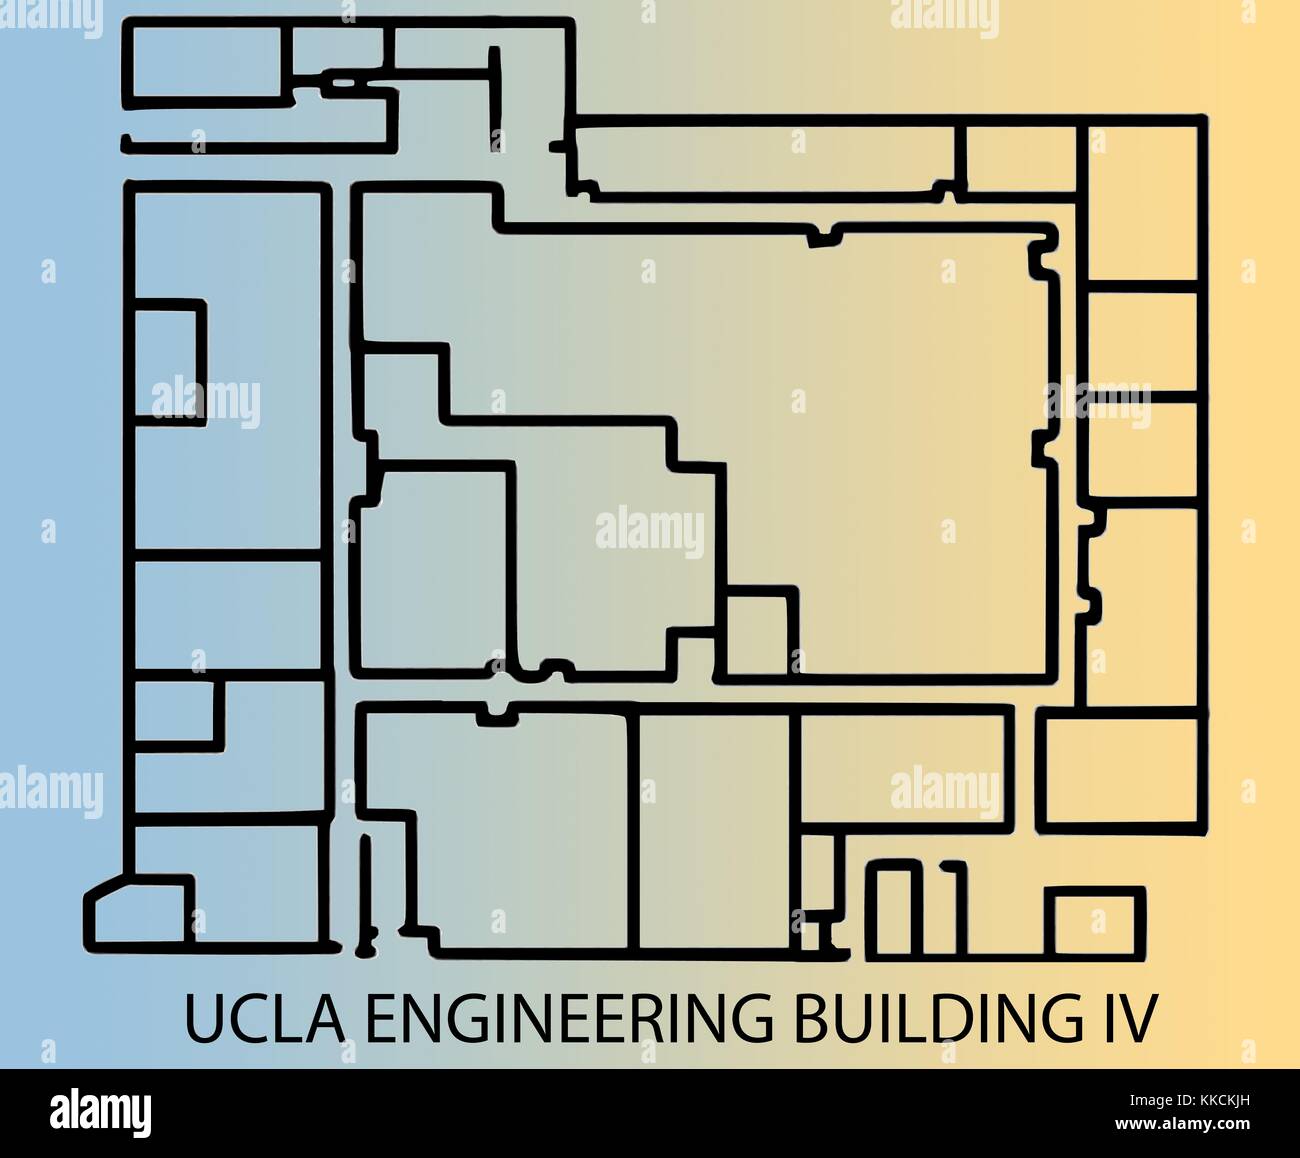 Floorplan for Engineering Building IV on the campus of the University of California Los Angeles (UCLA), site of alleged shooting of Professor William Klug by student Mainak Sarkar. Derived from a historical image; position of features and scale not exact. 2016. Stock Photo